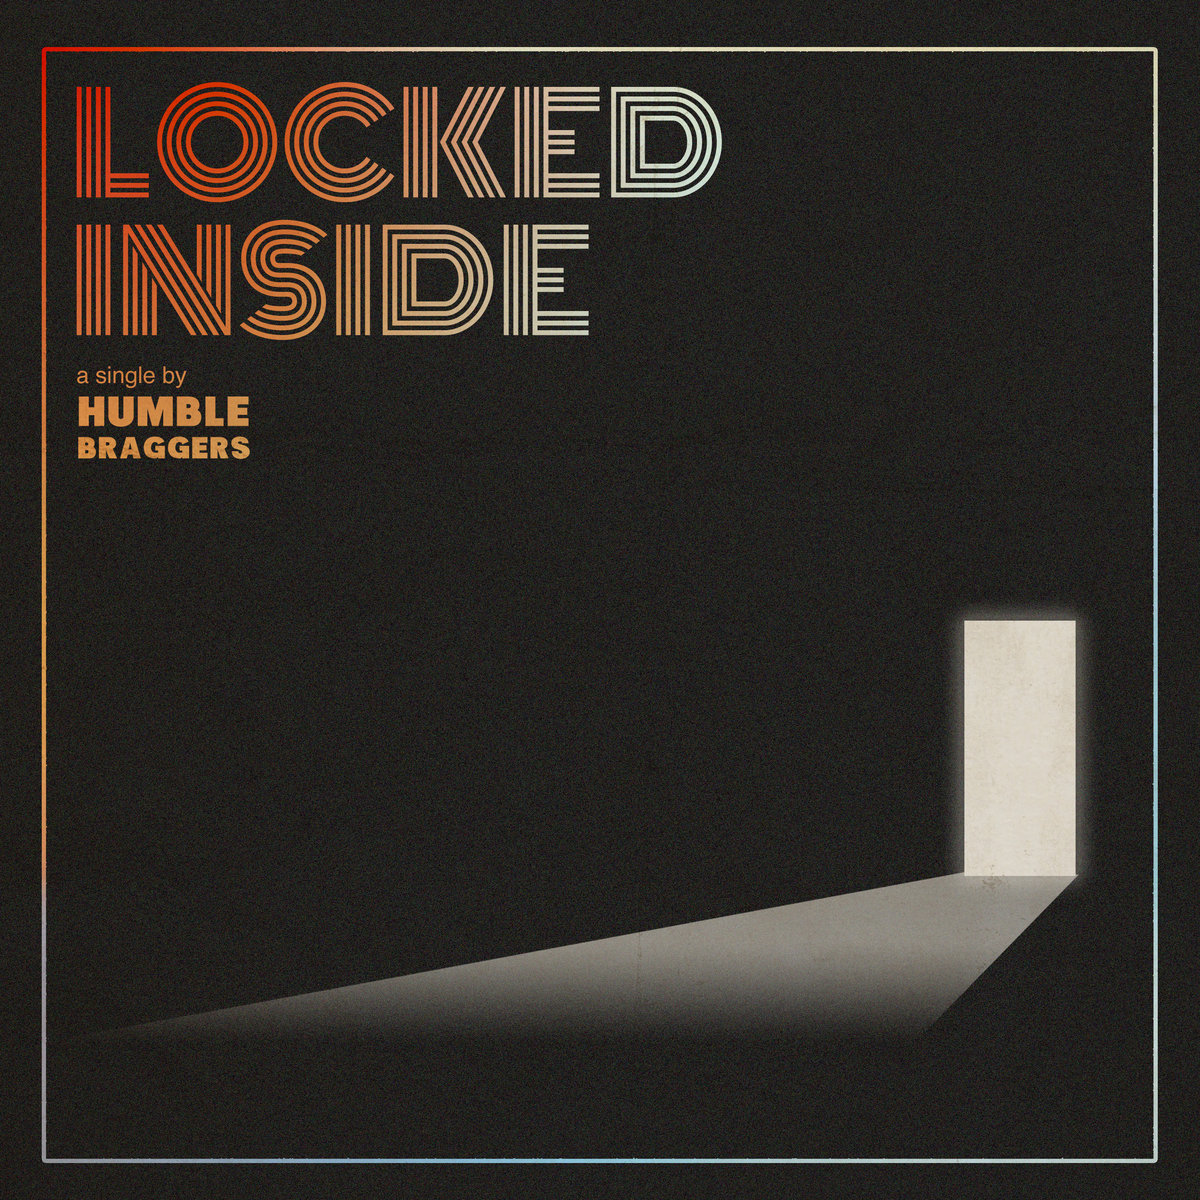 Humble Braggers Break Out With New Single “Locked Inside”